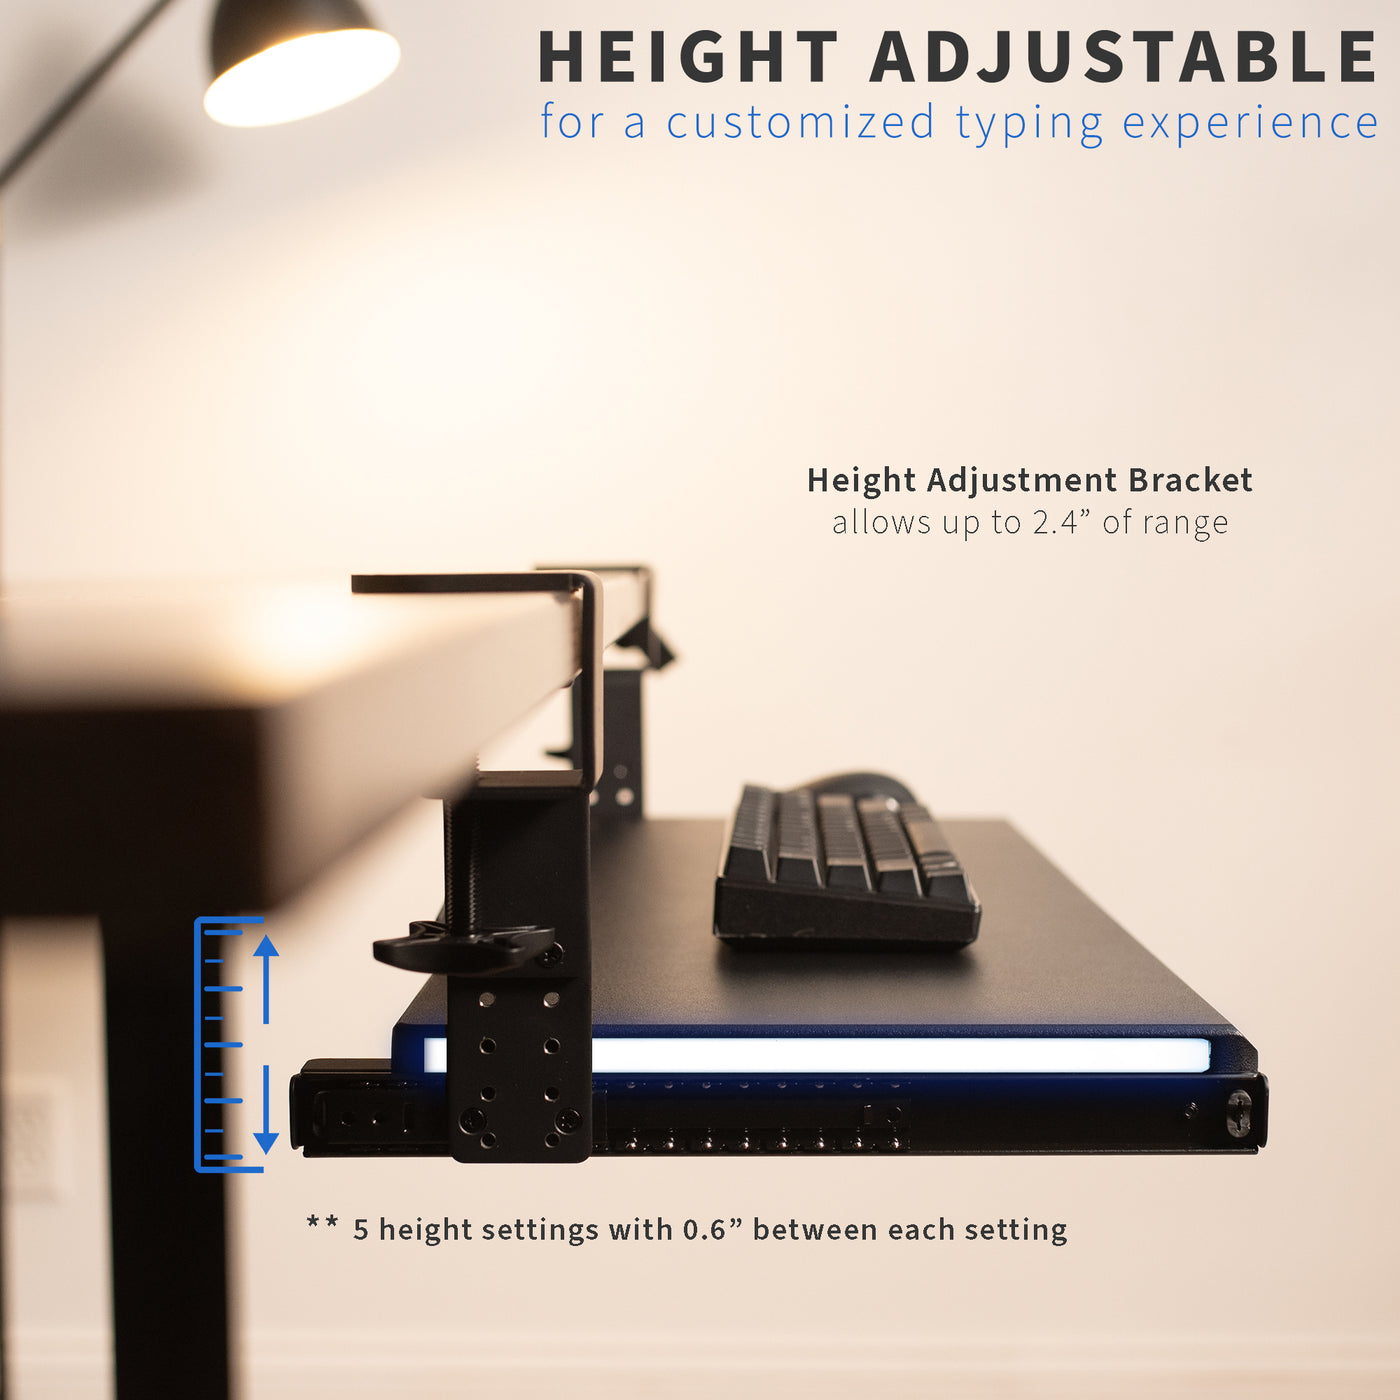 Experience a customized typing level with height-adjustable brackets.